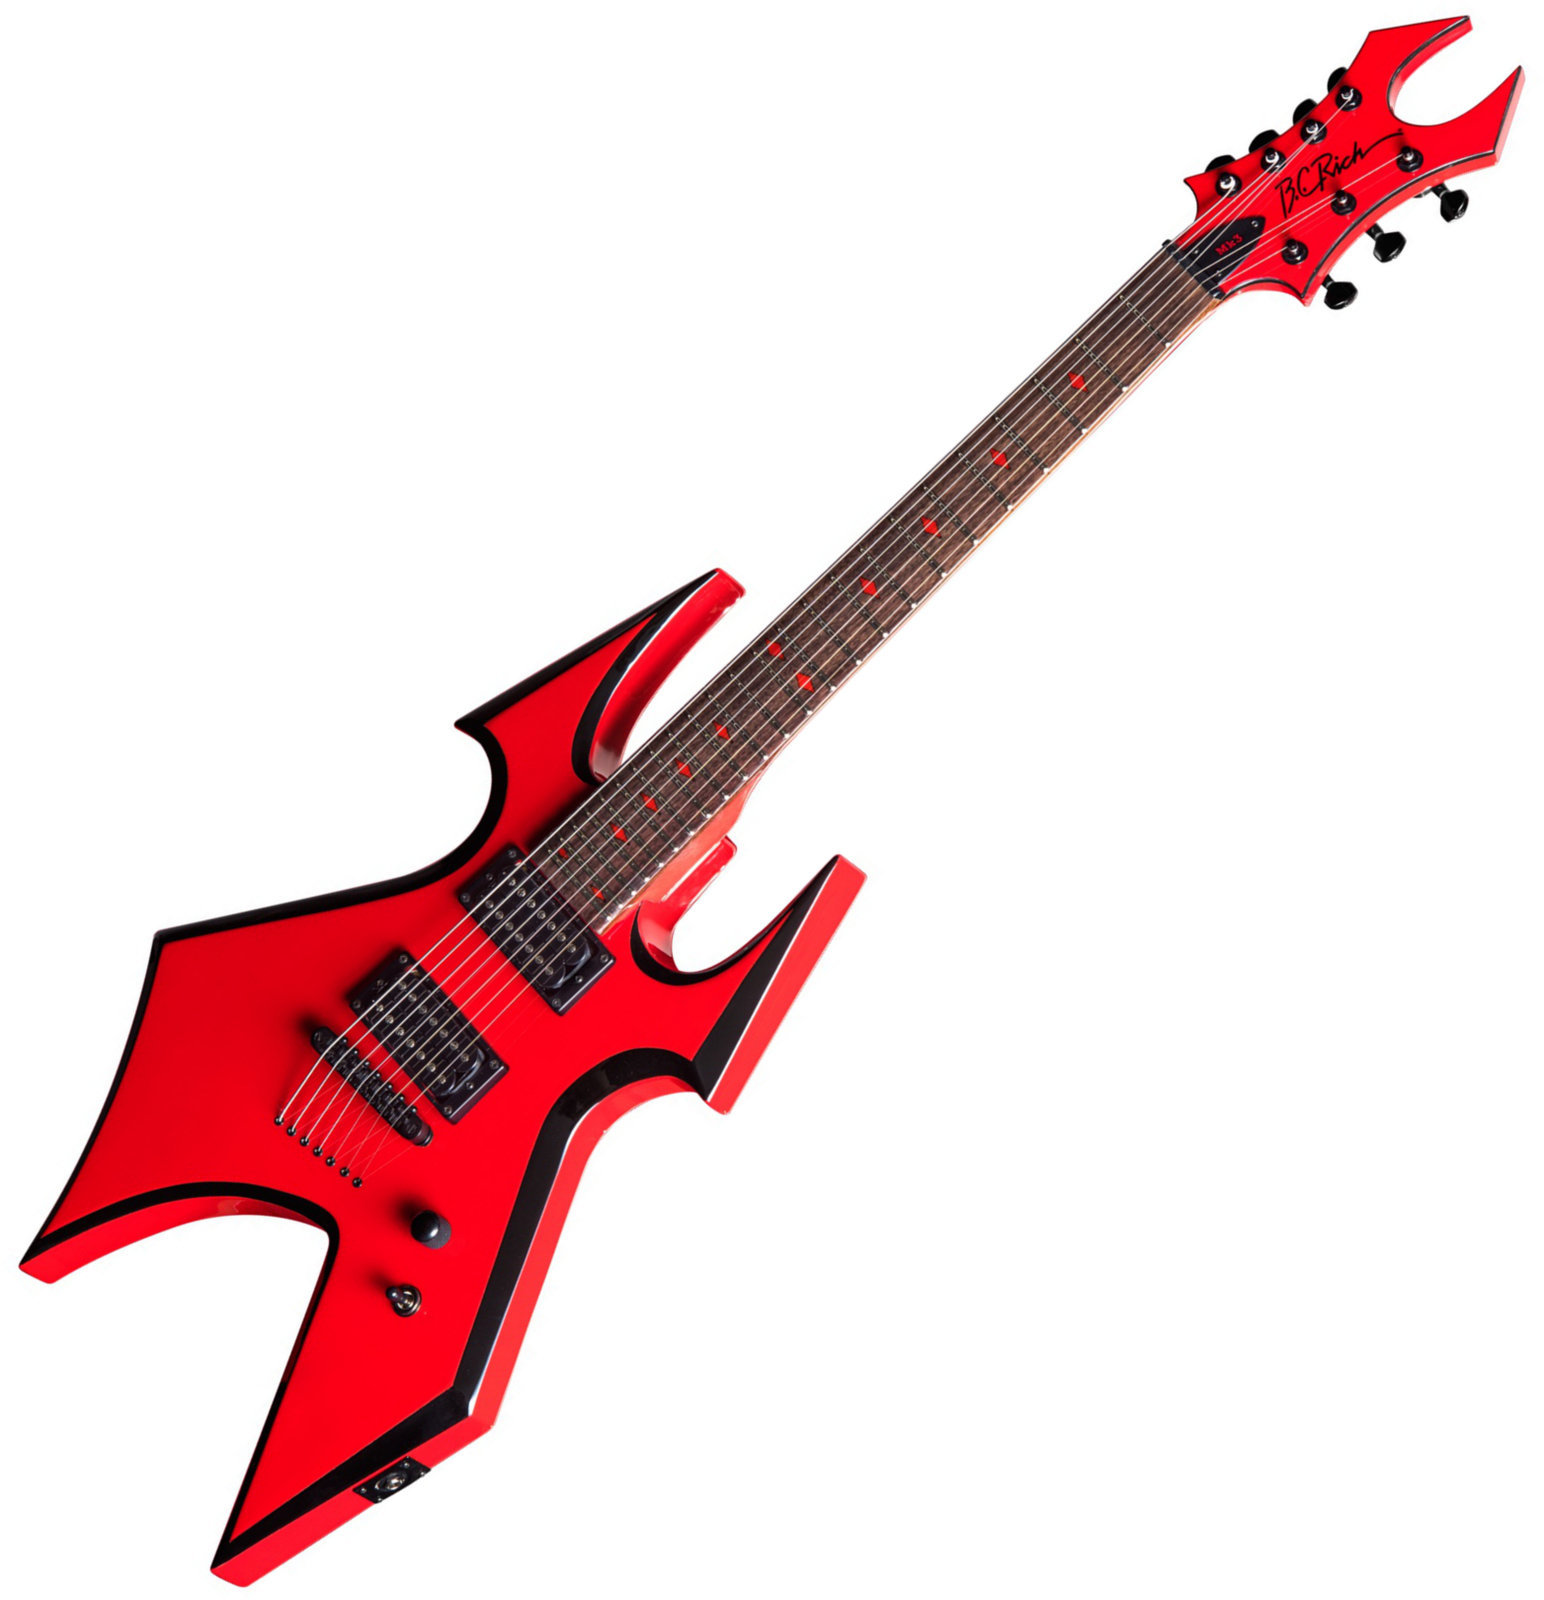 7-string Electric Guitar BC RICH MK3 Warbeast 7 Red Devil